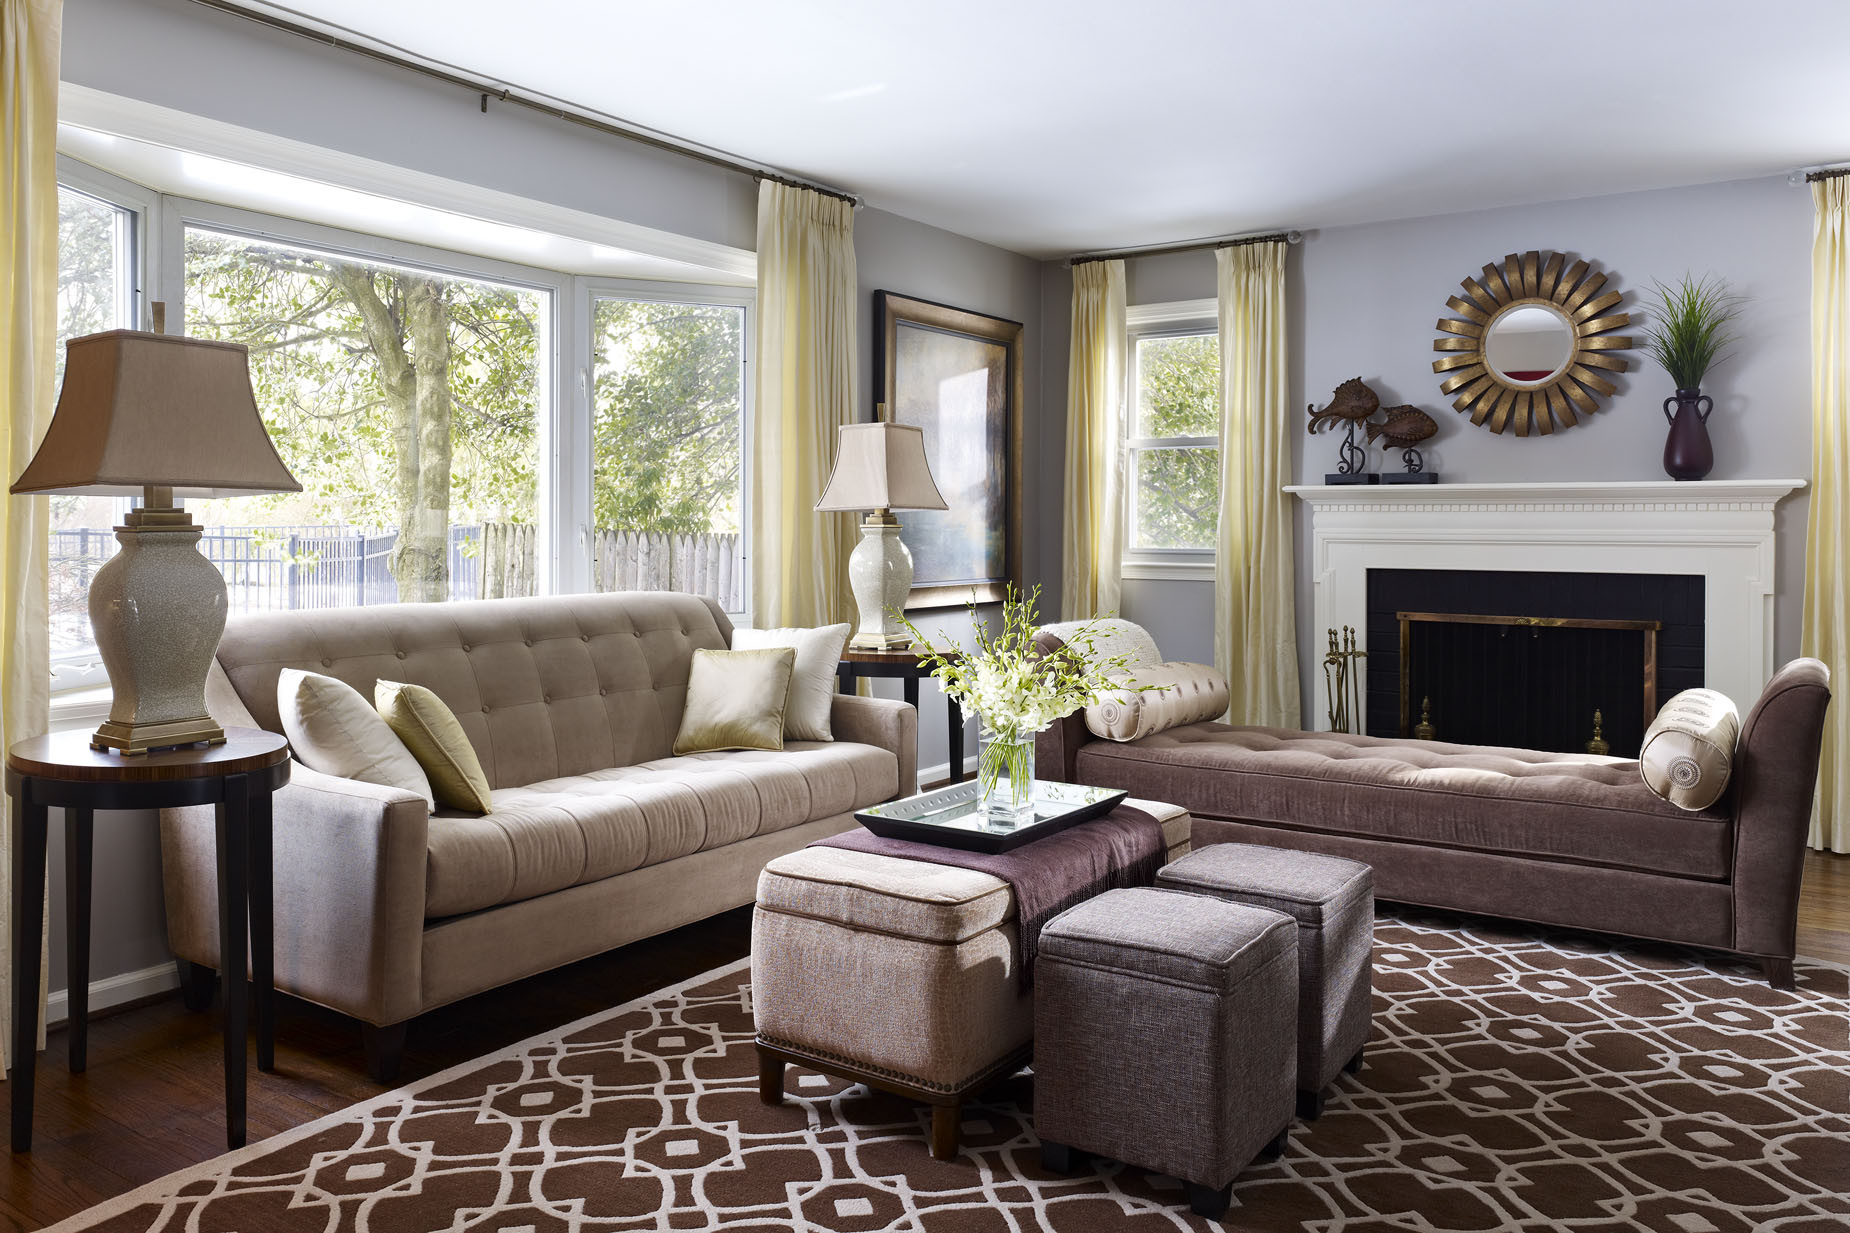 Living Room Decor Styles
 What’s your design style Is it Transitional